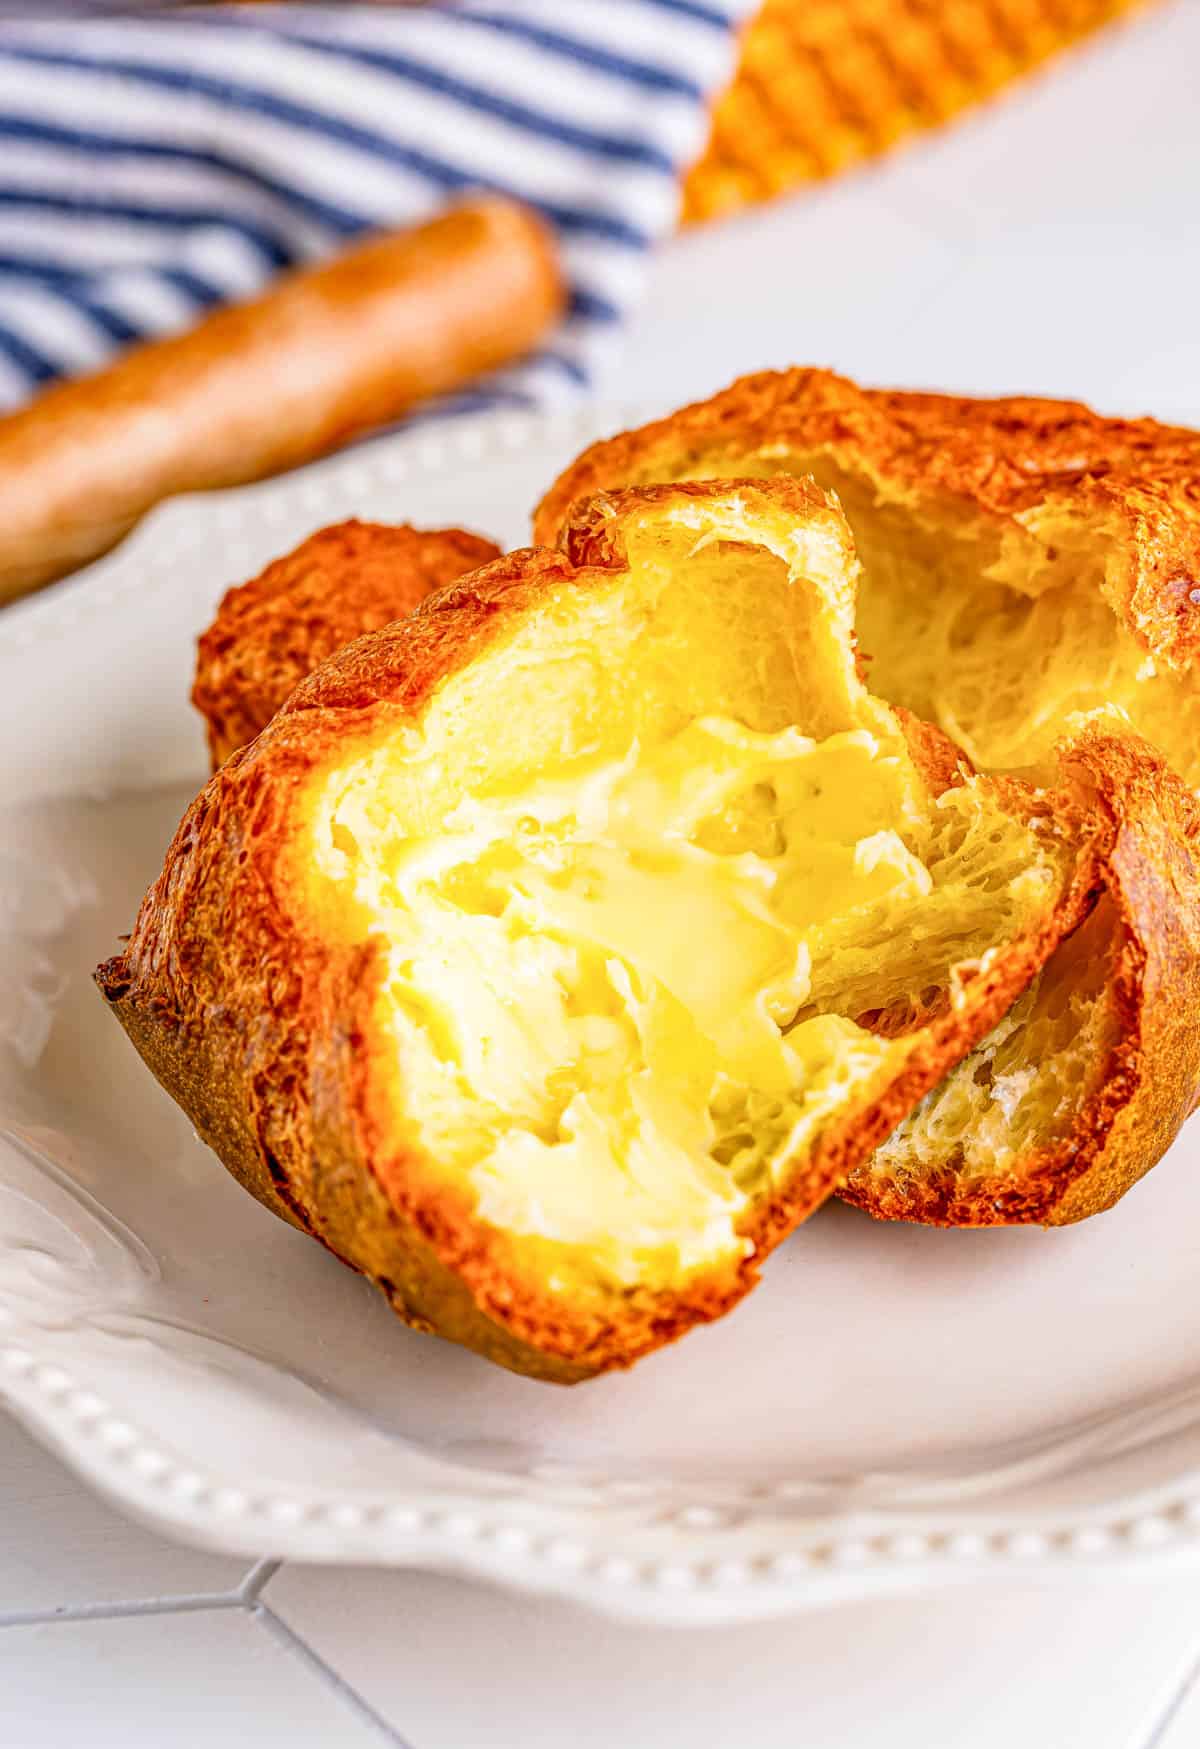 Open Popover smeared with butter.